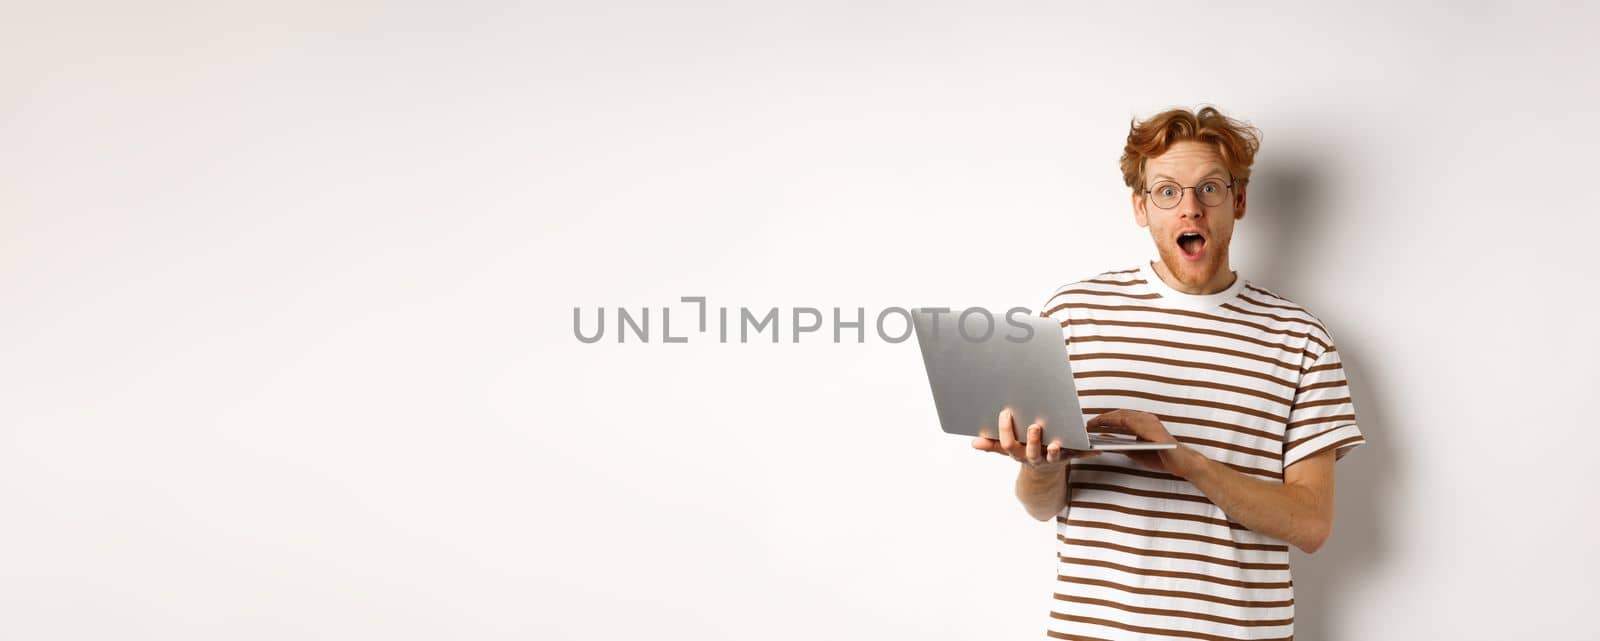 Impressed young man holding laptop in hands, staring at camera with excited face, reading online promotion on website, standing against white backround.